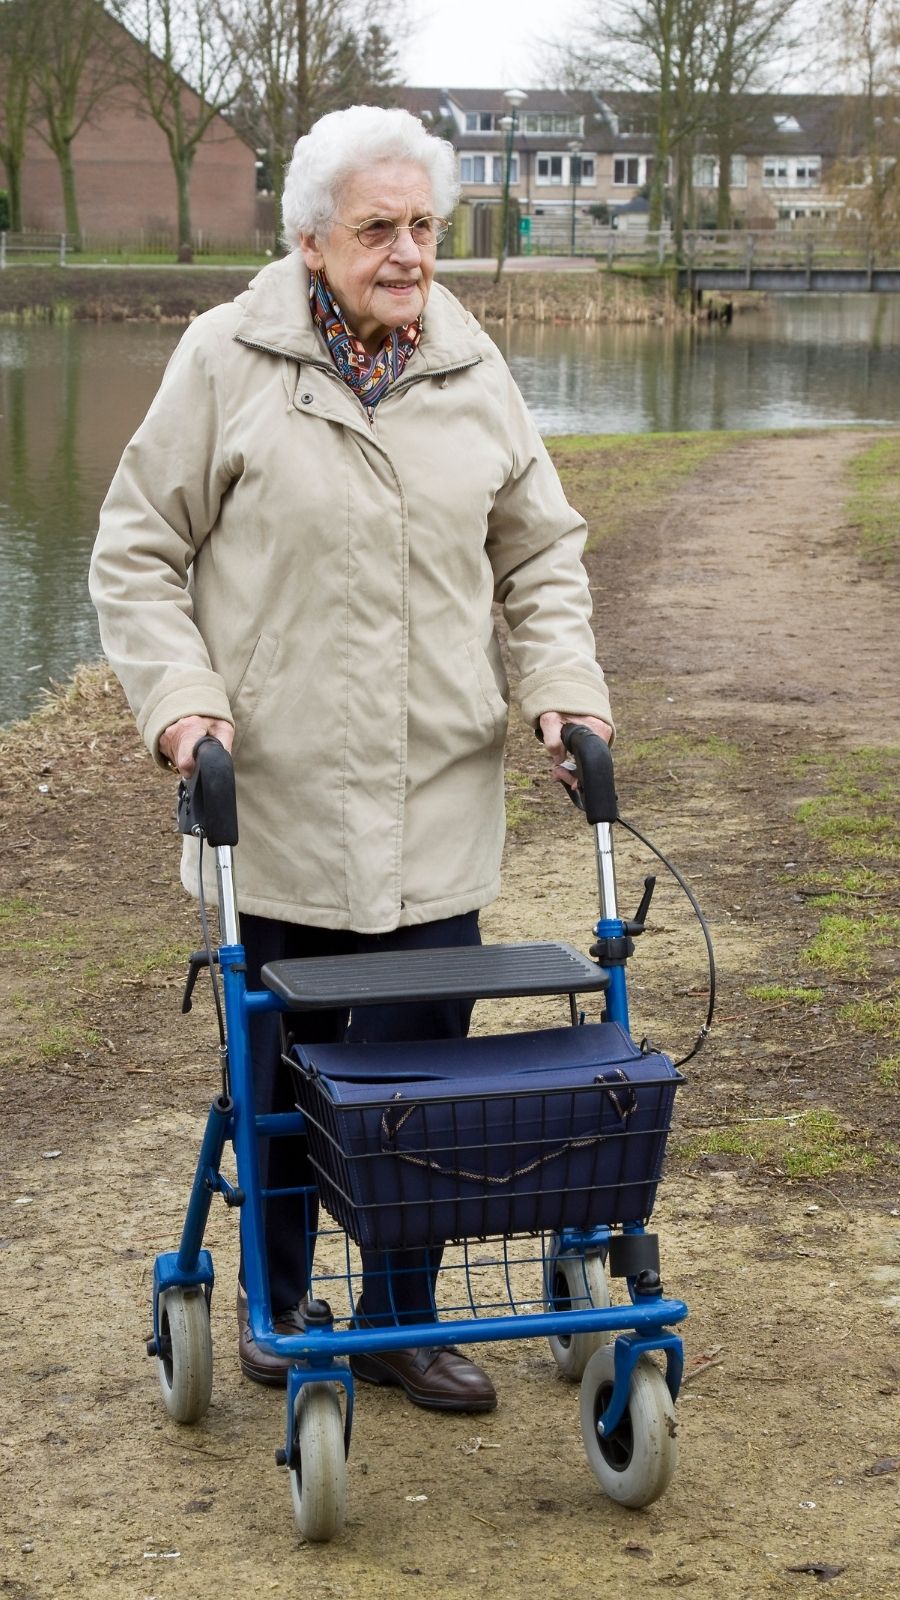 Walking Aids for Seniors: 3 Solid Options